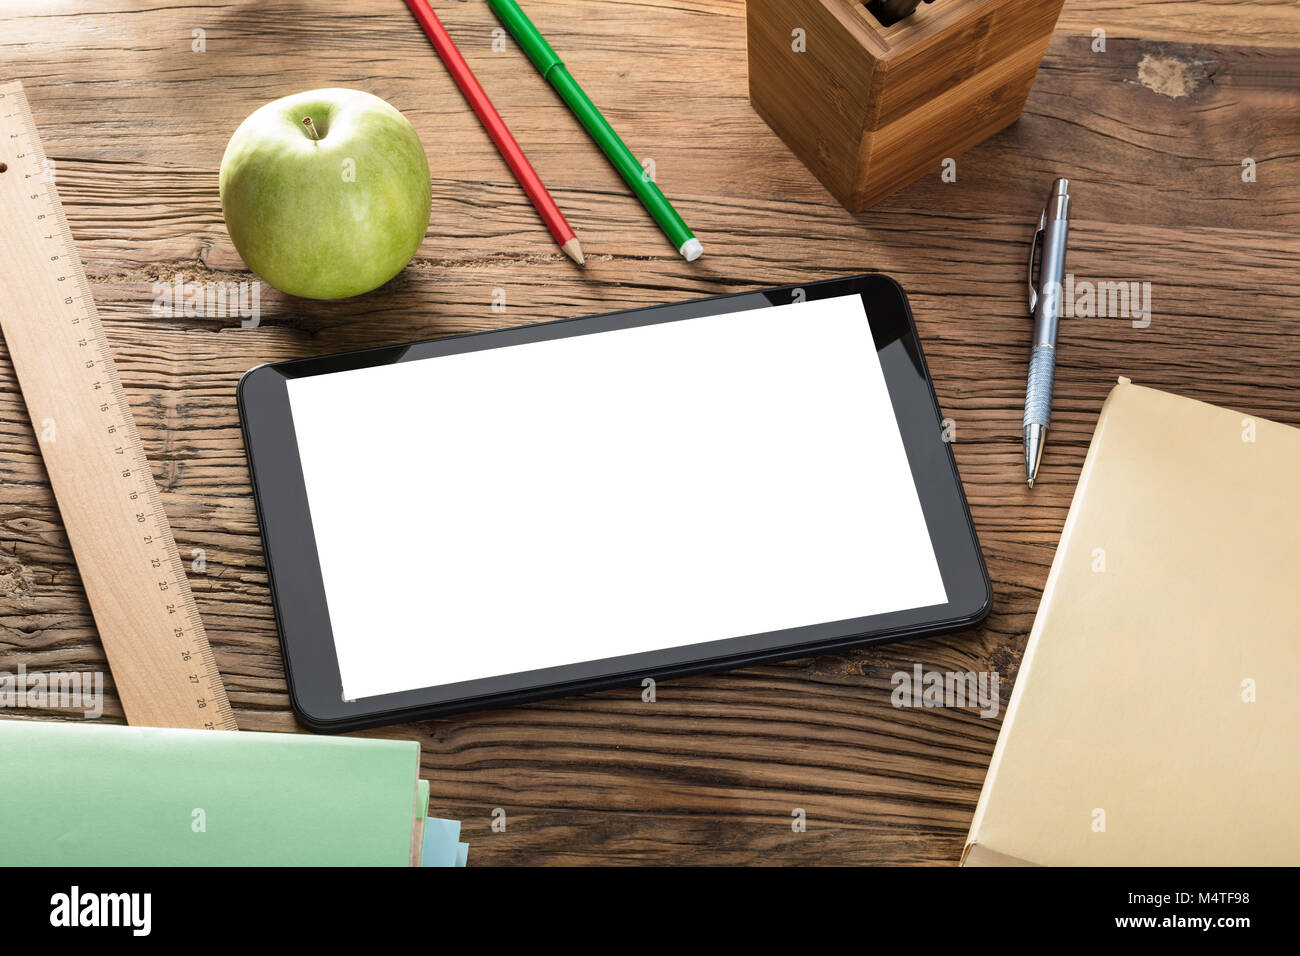 Green Apple And Blank Screen Digital Tablet On Wooden Table With Office Supplies Stock Photo